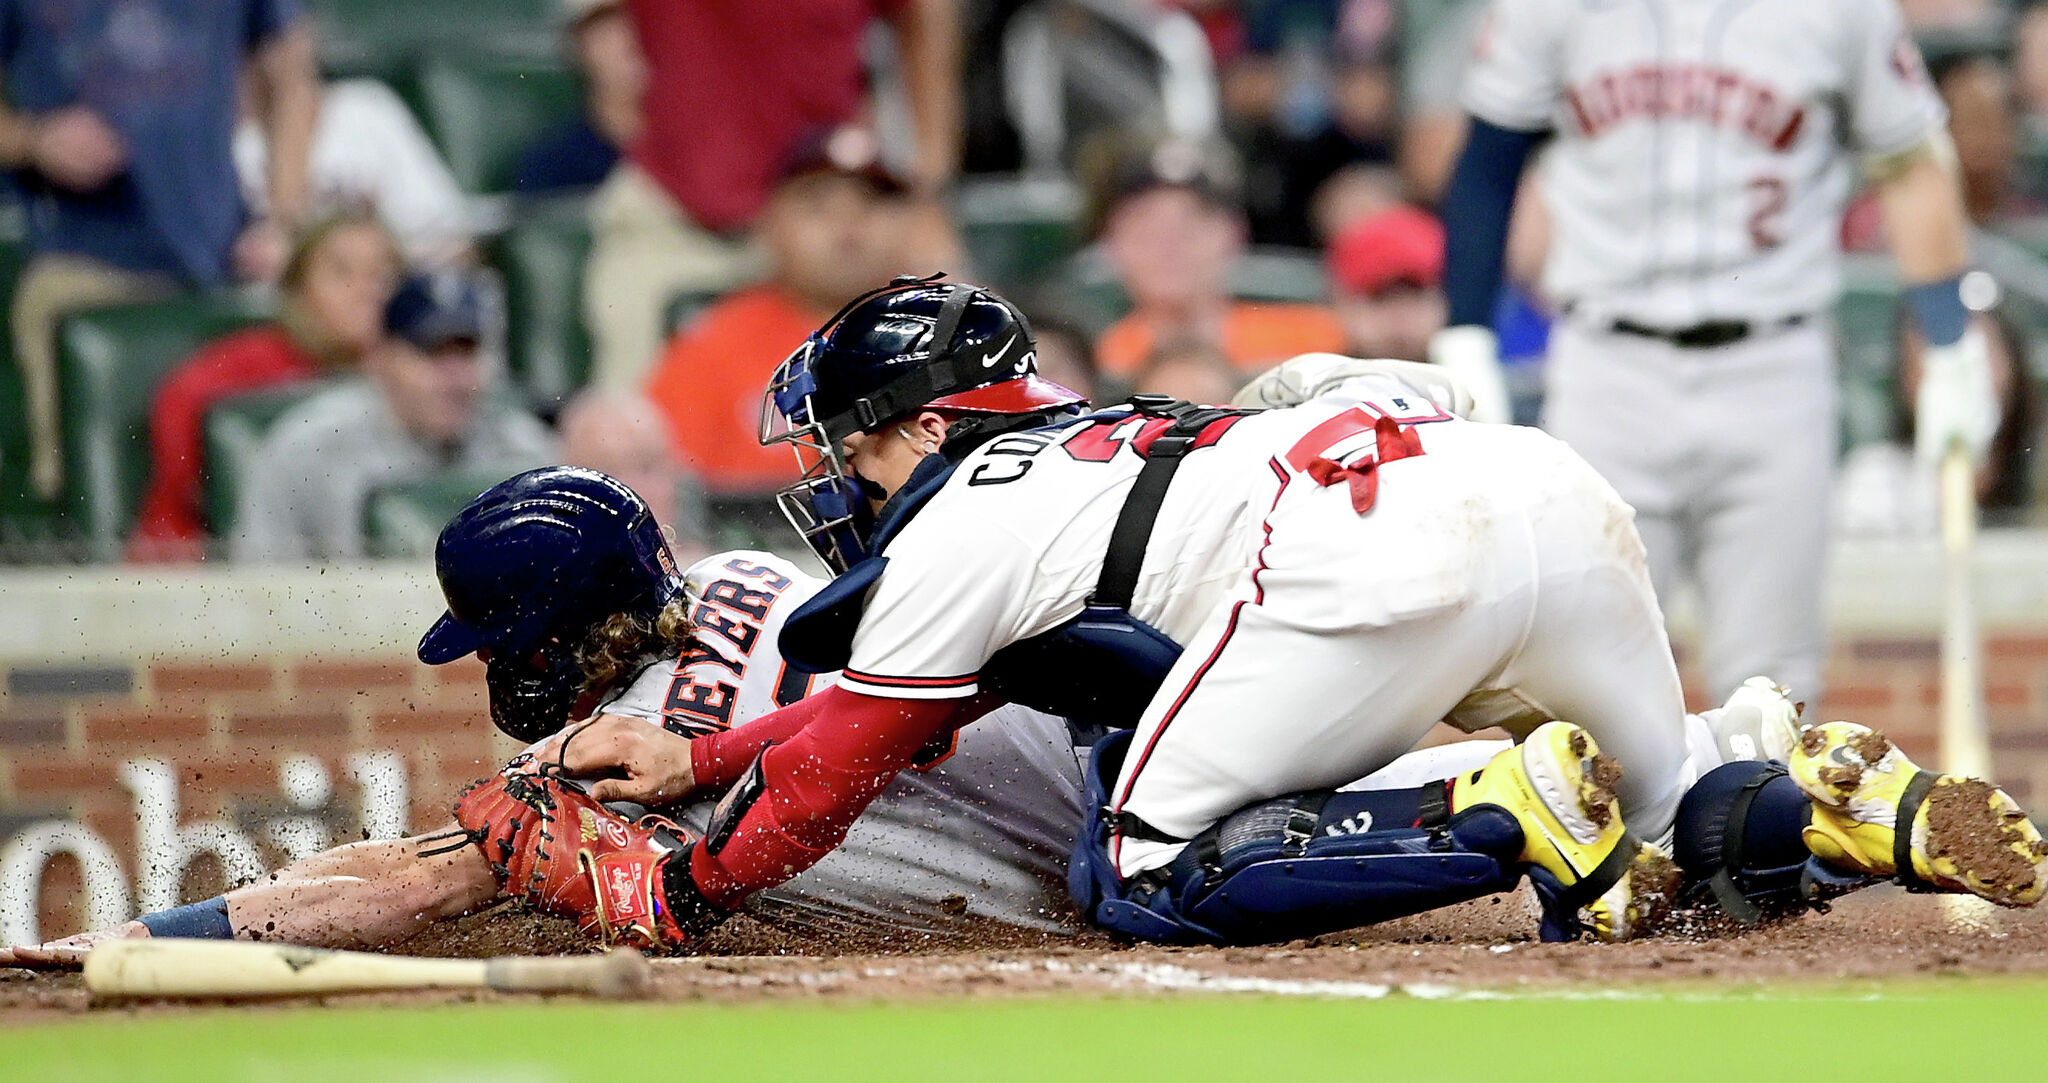 Olson's check-swing double in 11th helps Braves top Astros